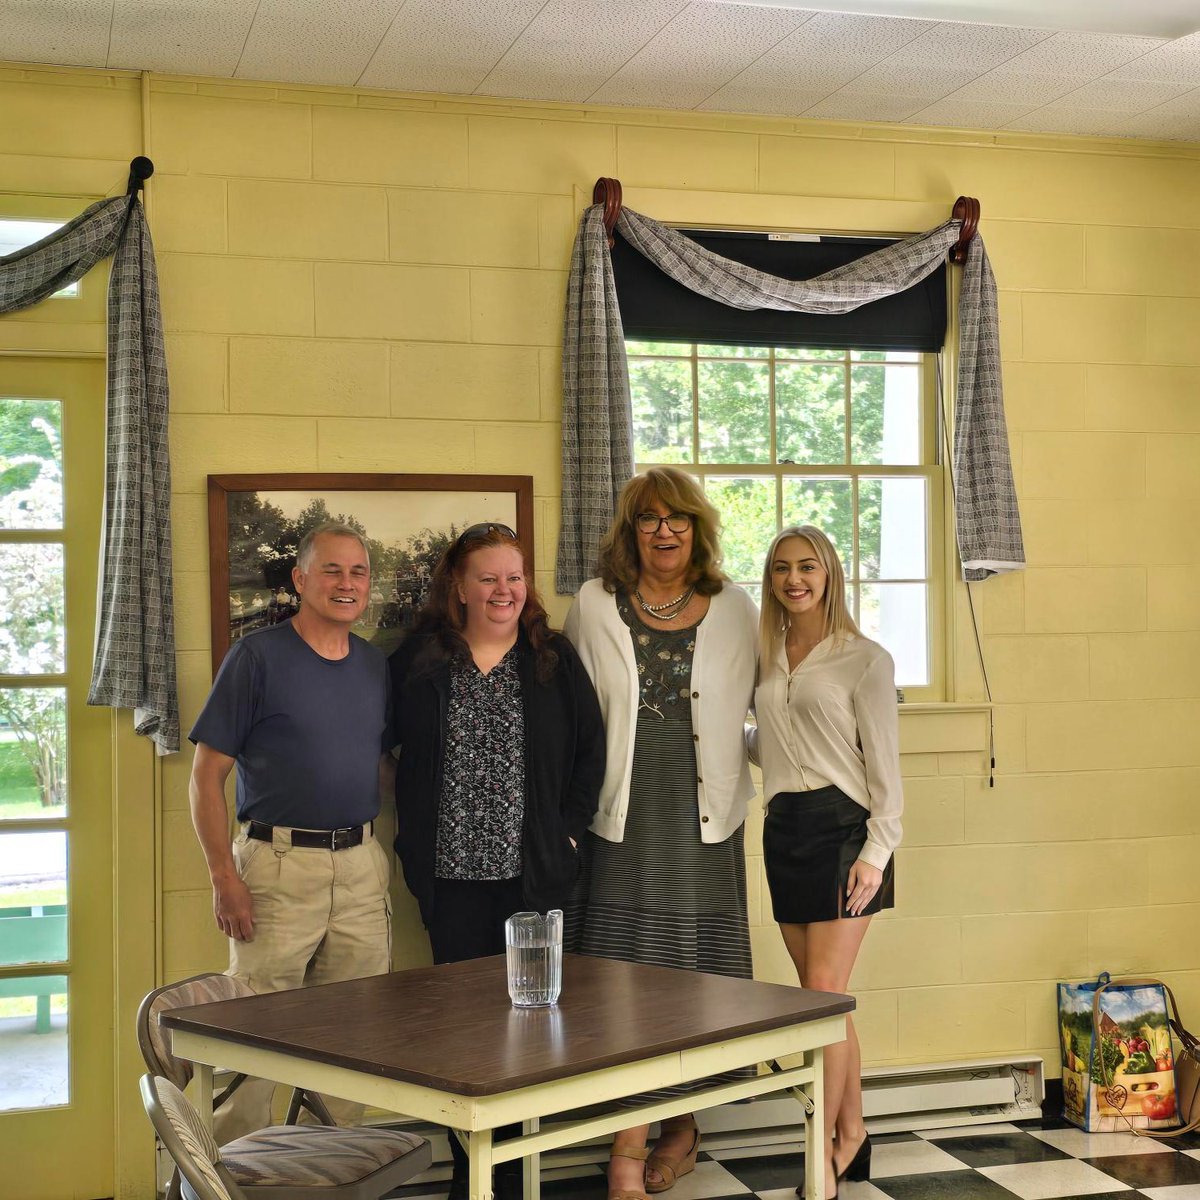 🍽💡 Another fantastic Hospitality Lunch & Learn at Capon Spring & Farms. We delved into controlling costs without compromising the guest experience. Loved it? Sign up for our upcoming fall Hospitality & Tourism Management certificate program!
easternwv.edu/hospitality-to…
#DiscoverEWV